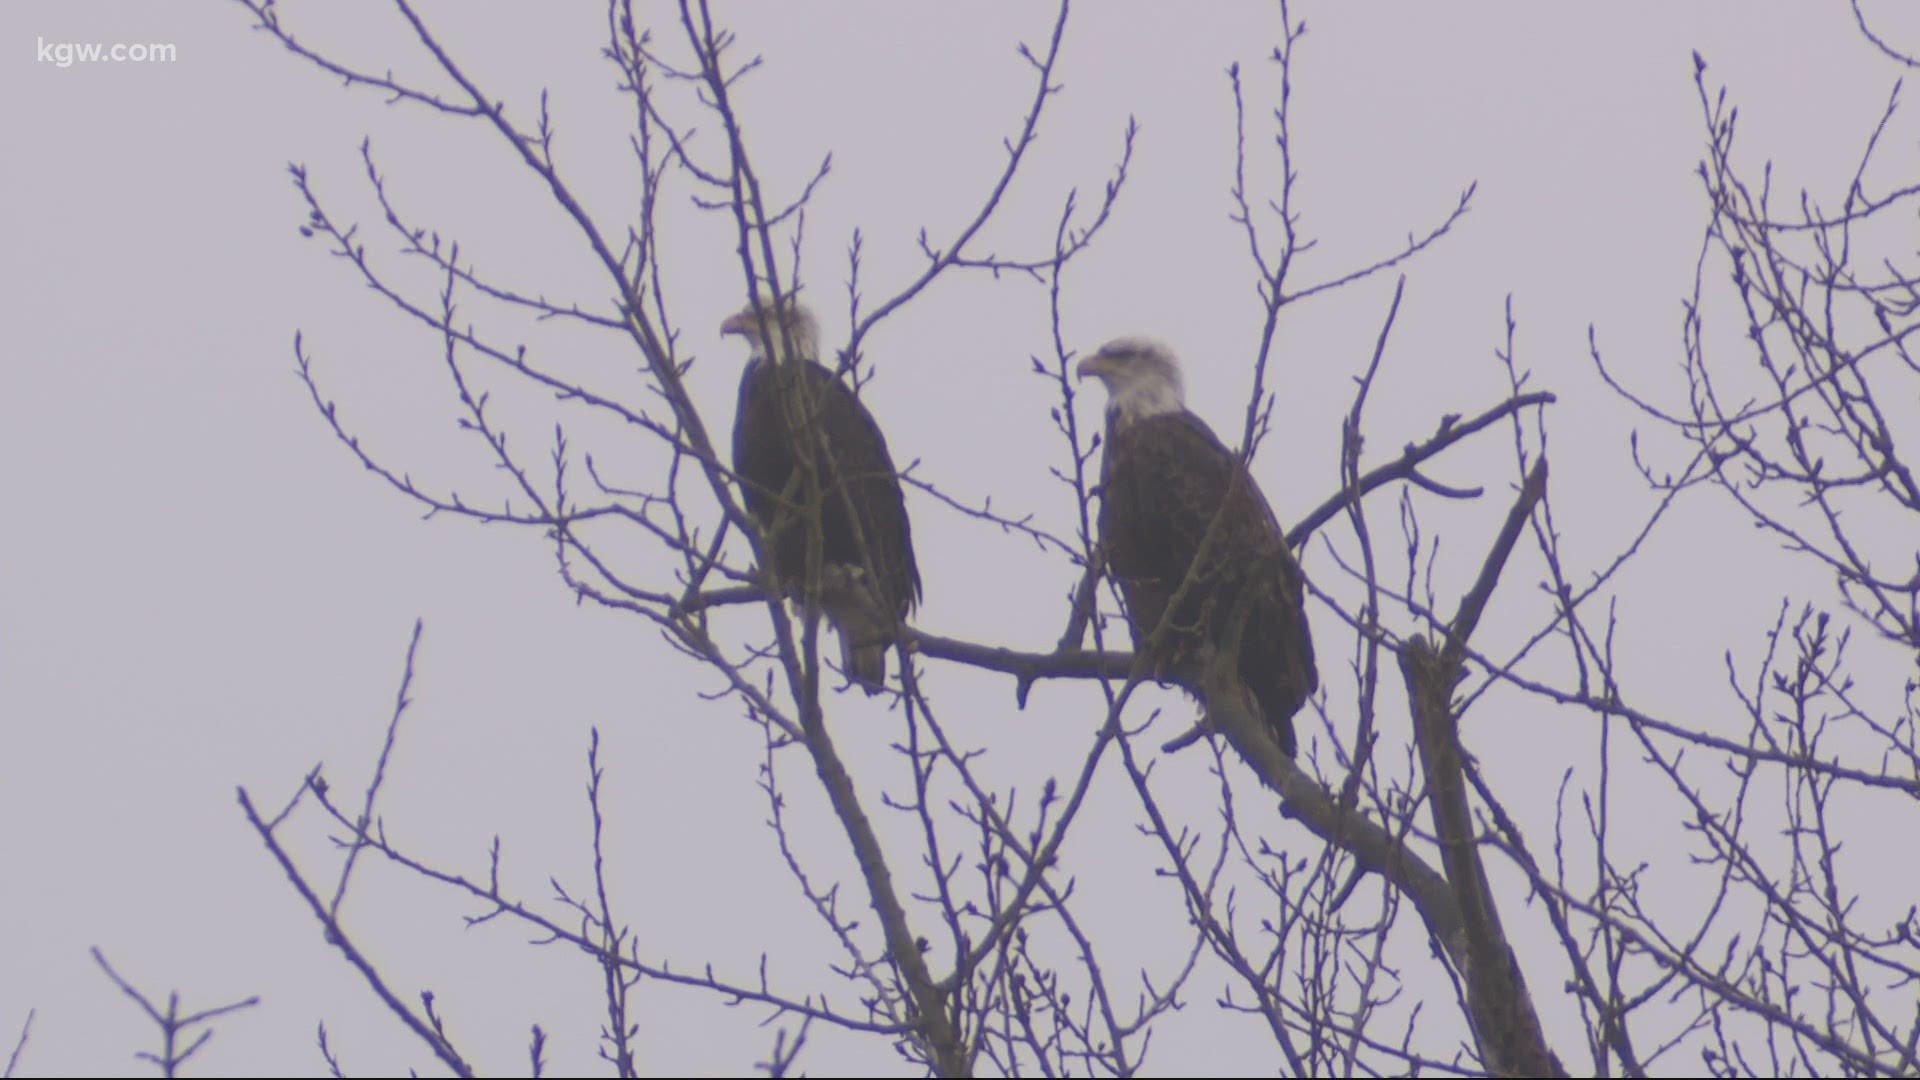 Grant McOmie shows off one of the most remarkable eagle convocations in the Willamette Valley.